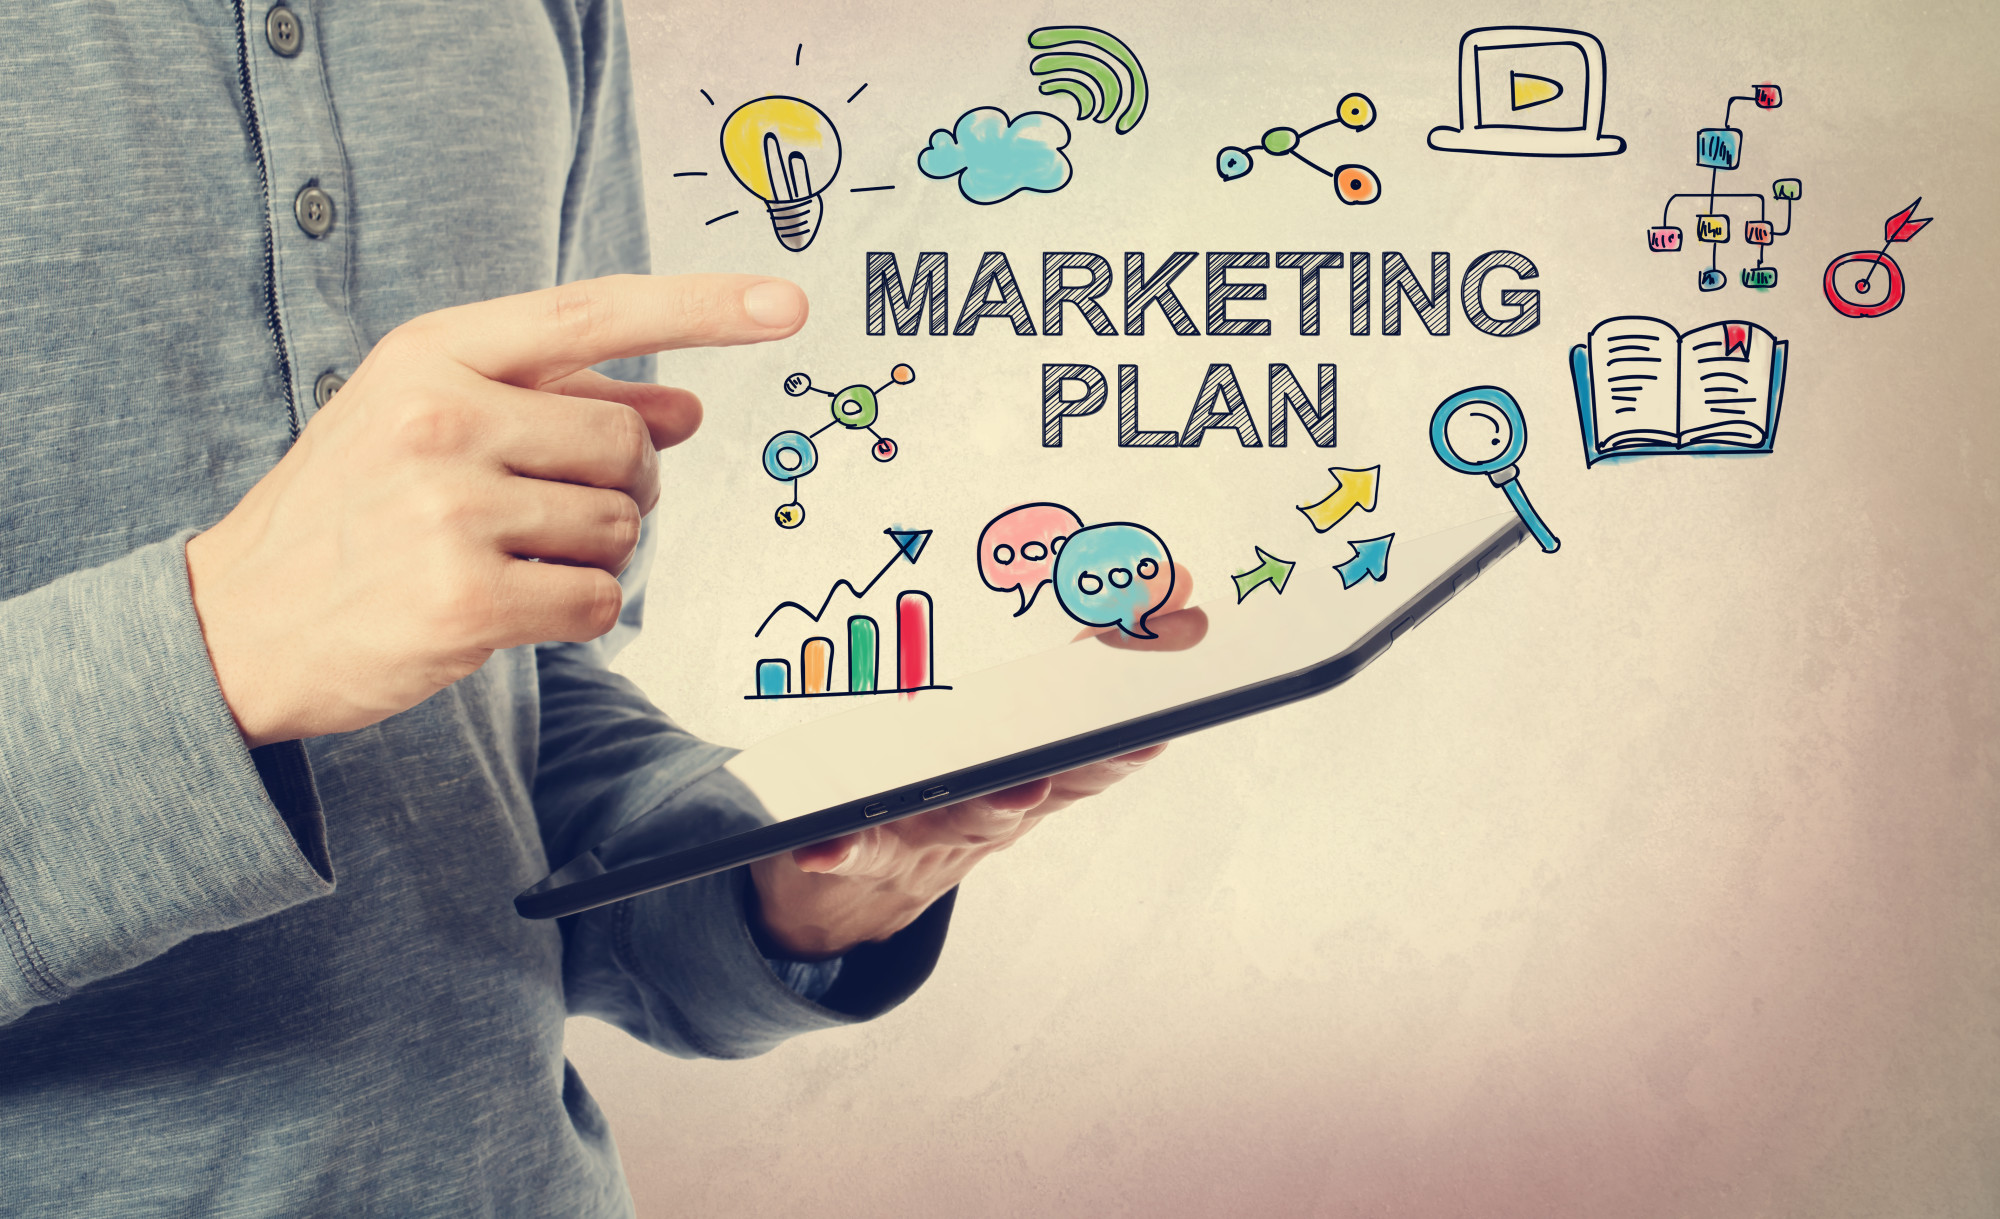 marketing plan text and icons